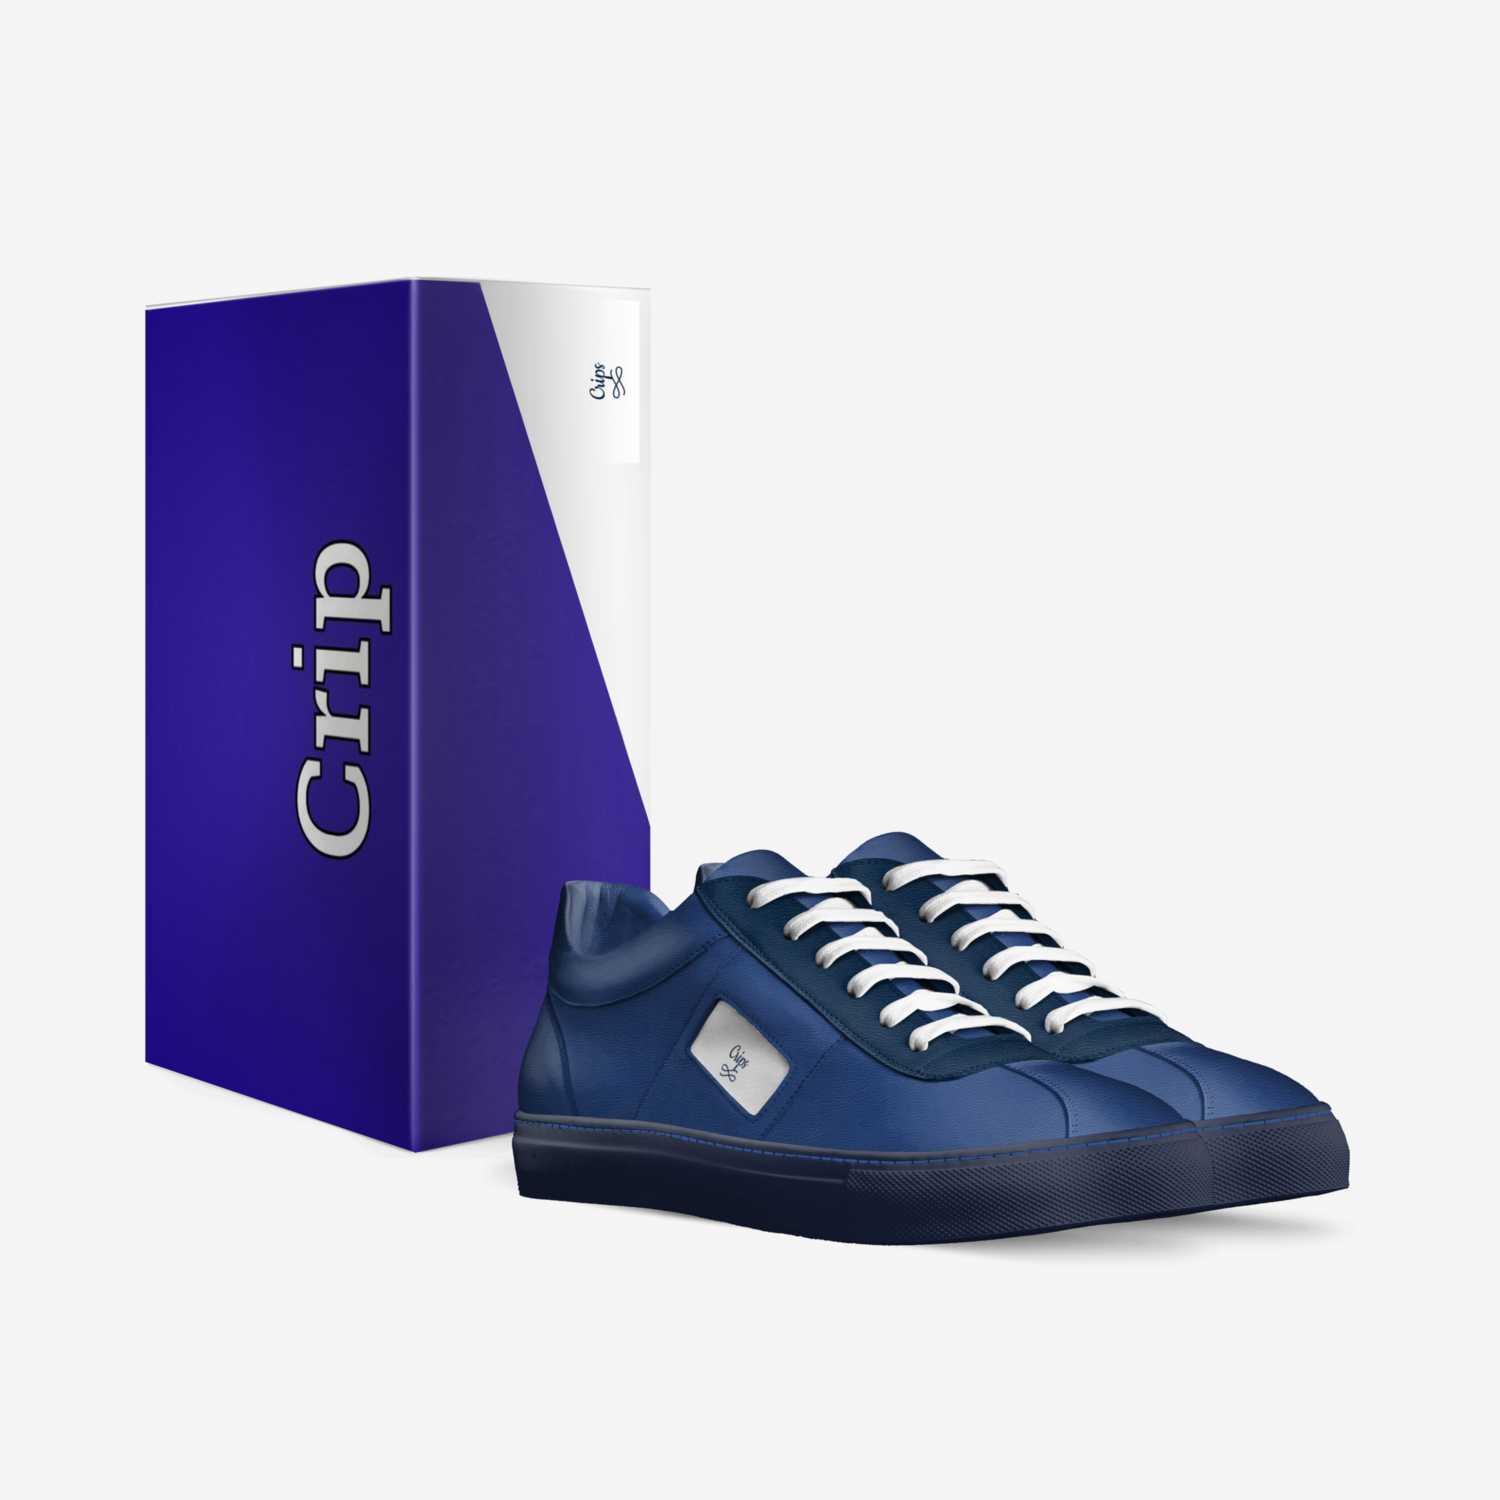 Crips custom made in Italy shoes by Claude Iii | Box view